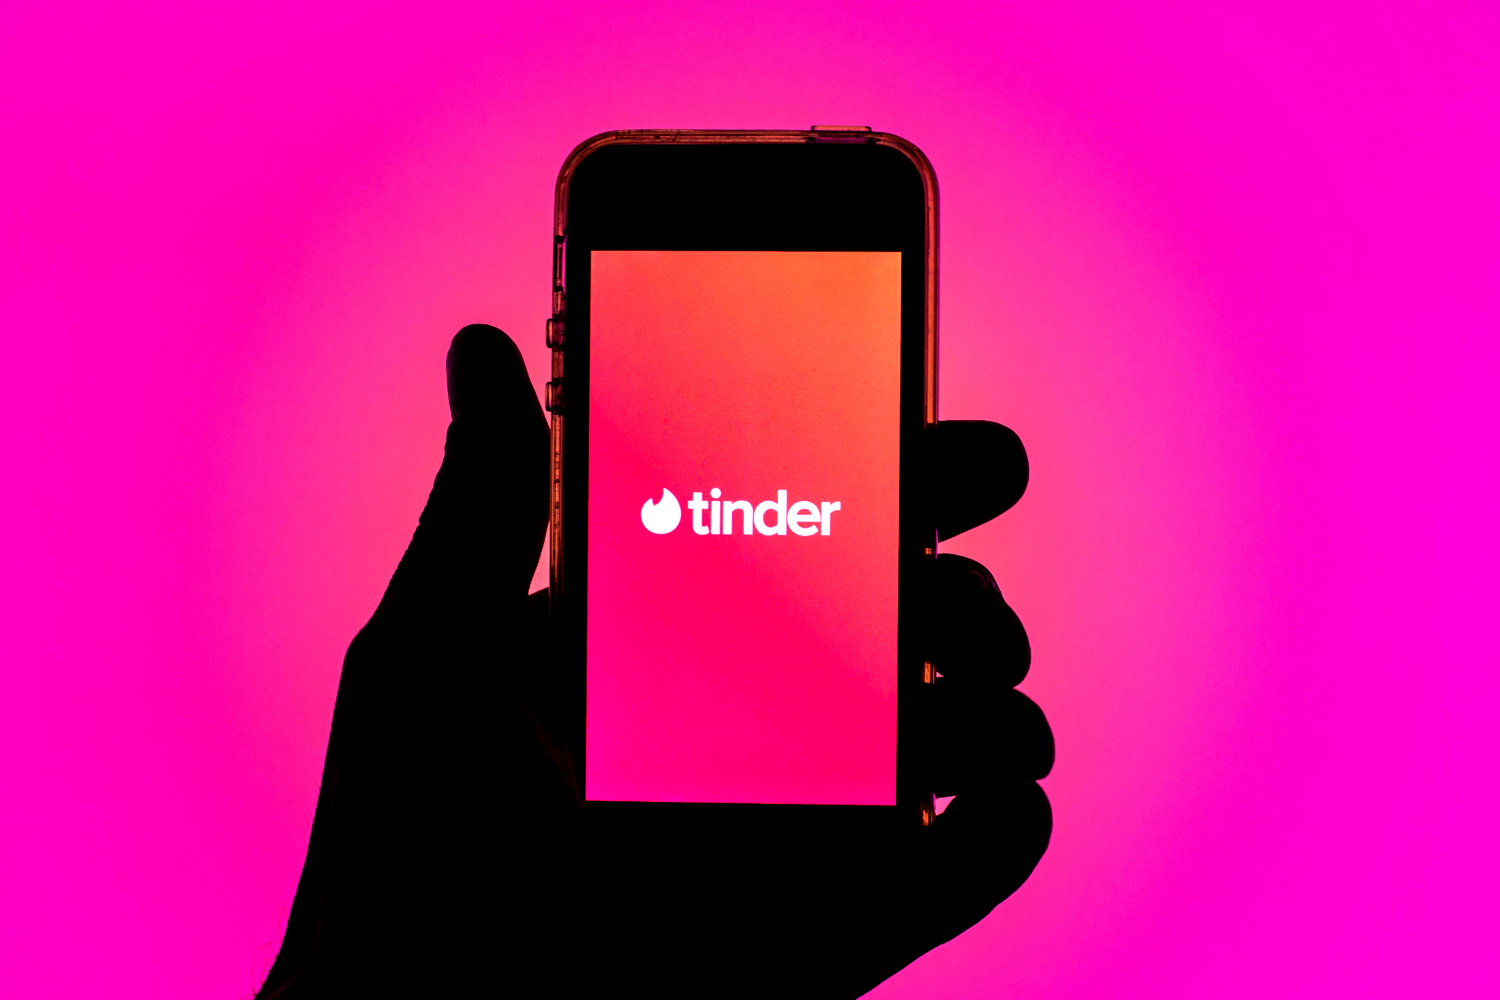 A silhouette of a hand holds a smartphone, displaying the Tinder logo again...